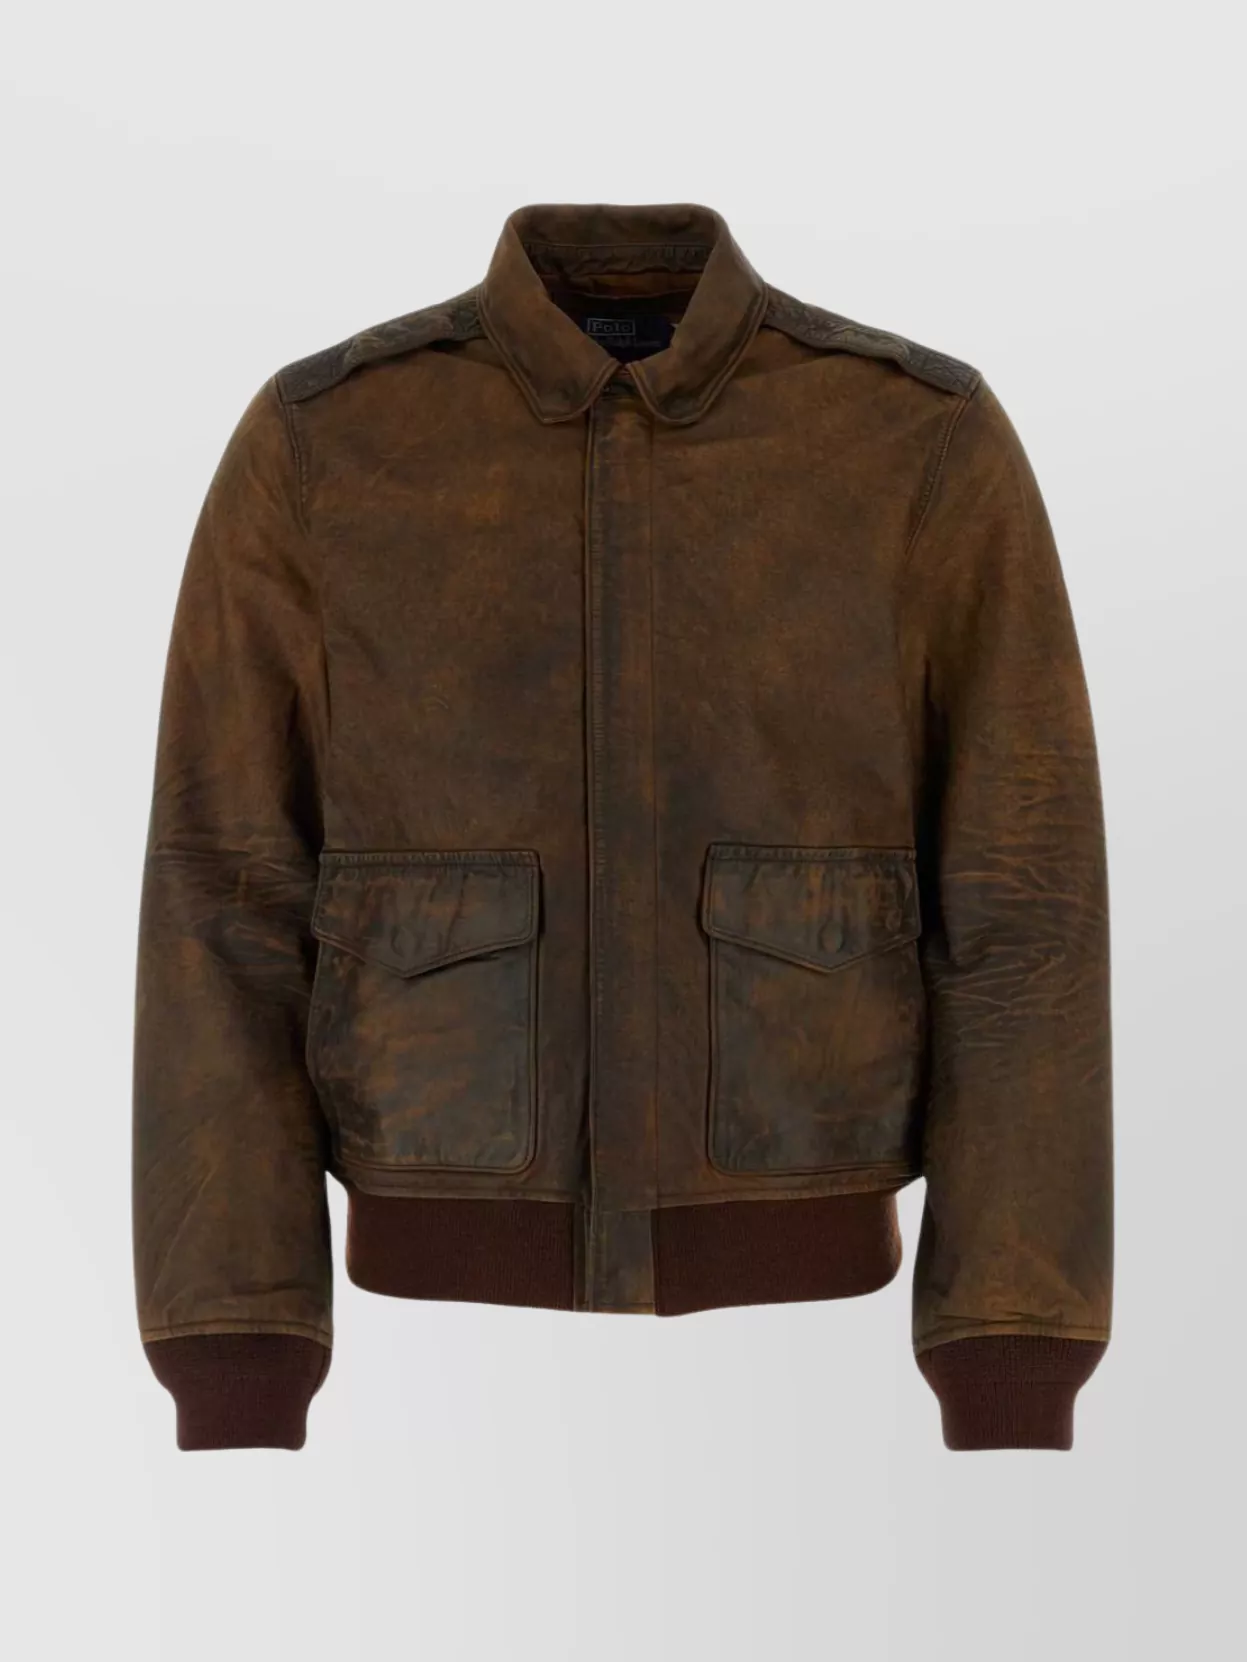 POLO RALPH LAUREN LEATHER BOMBER JACKET WITH RIBBED CUFFS AND HEM